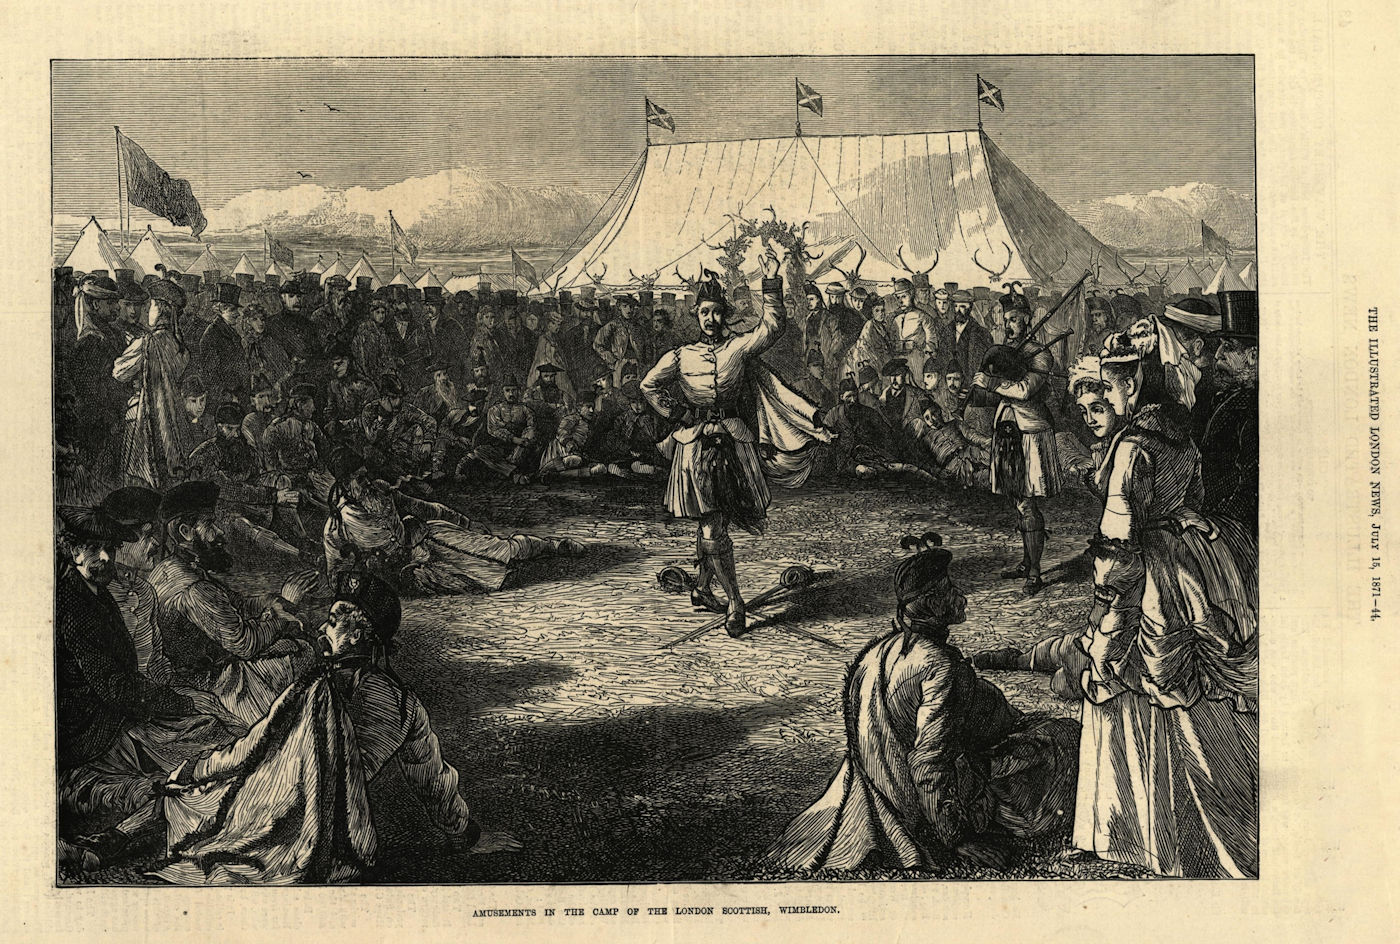 Amusements in the camp of the London Scottish, Wimbledon. Dance 1871 old print